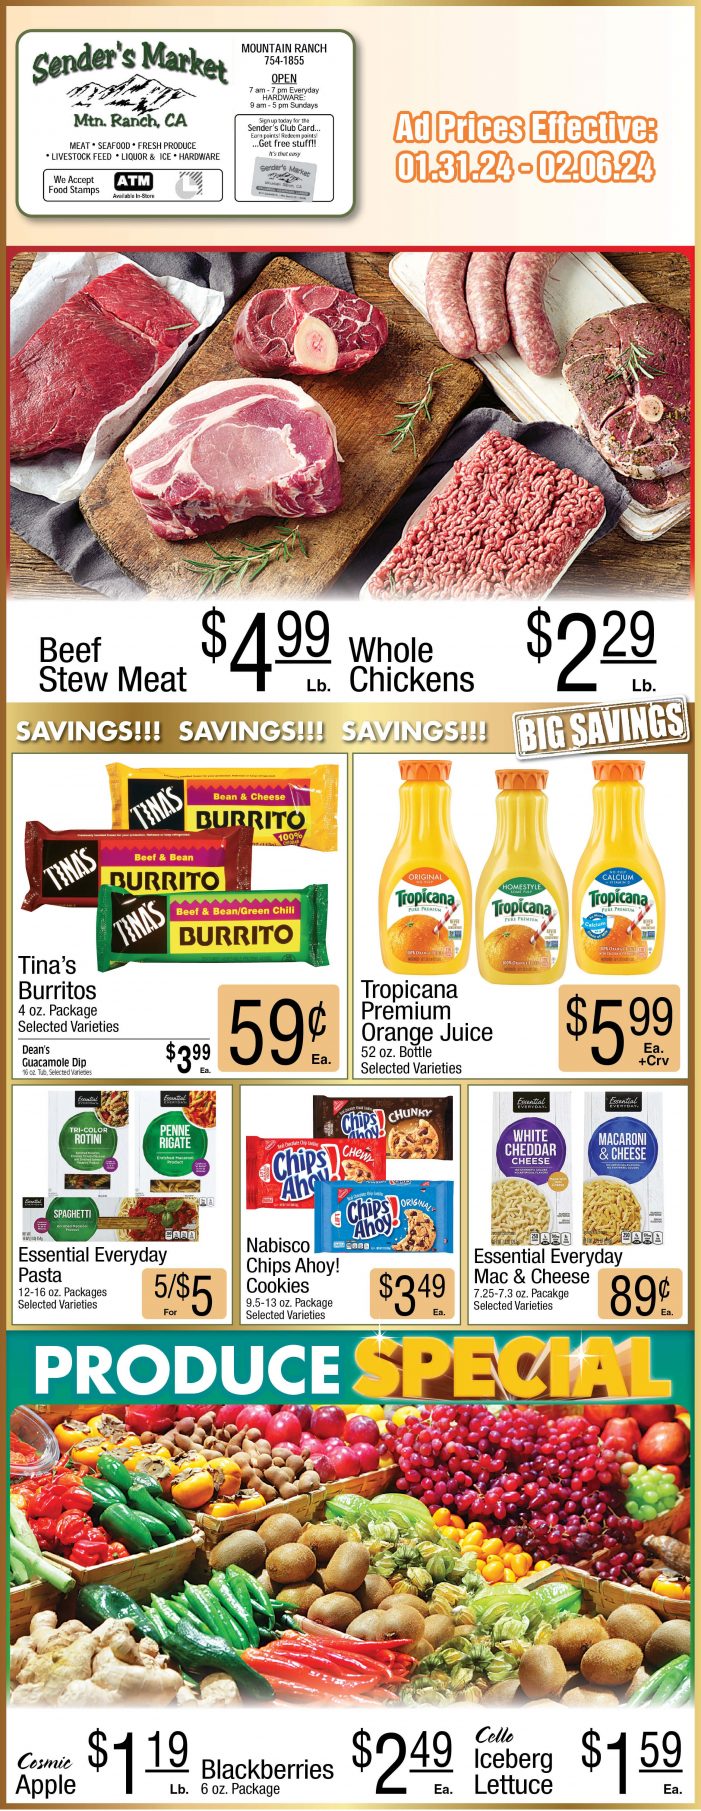 Sender’s Market Weekly Ad & Grocery Specials Through February 6th! Shop Local & Save!!